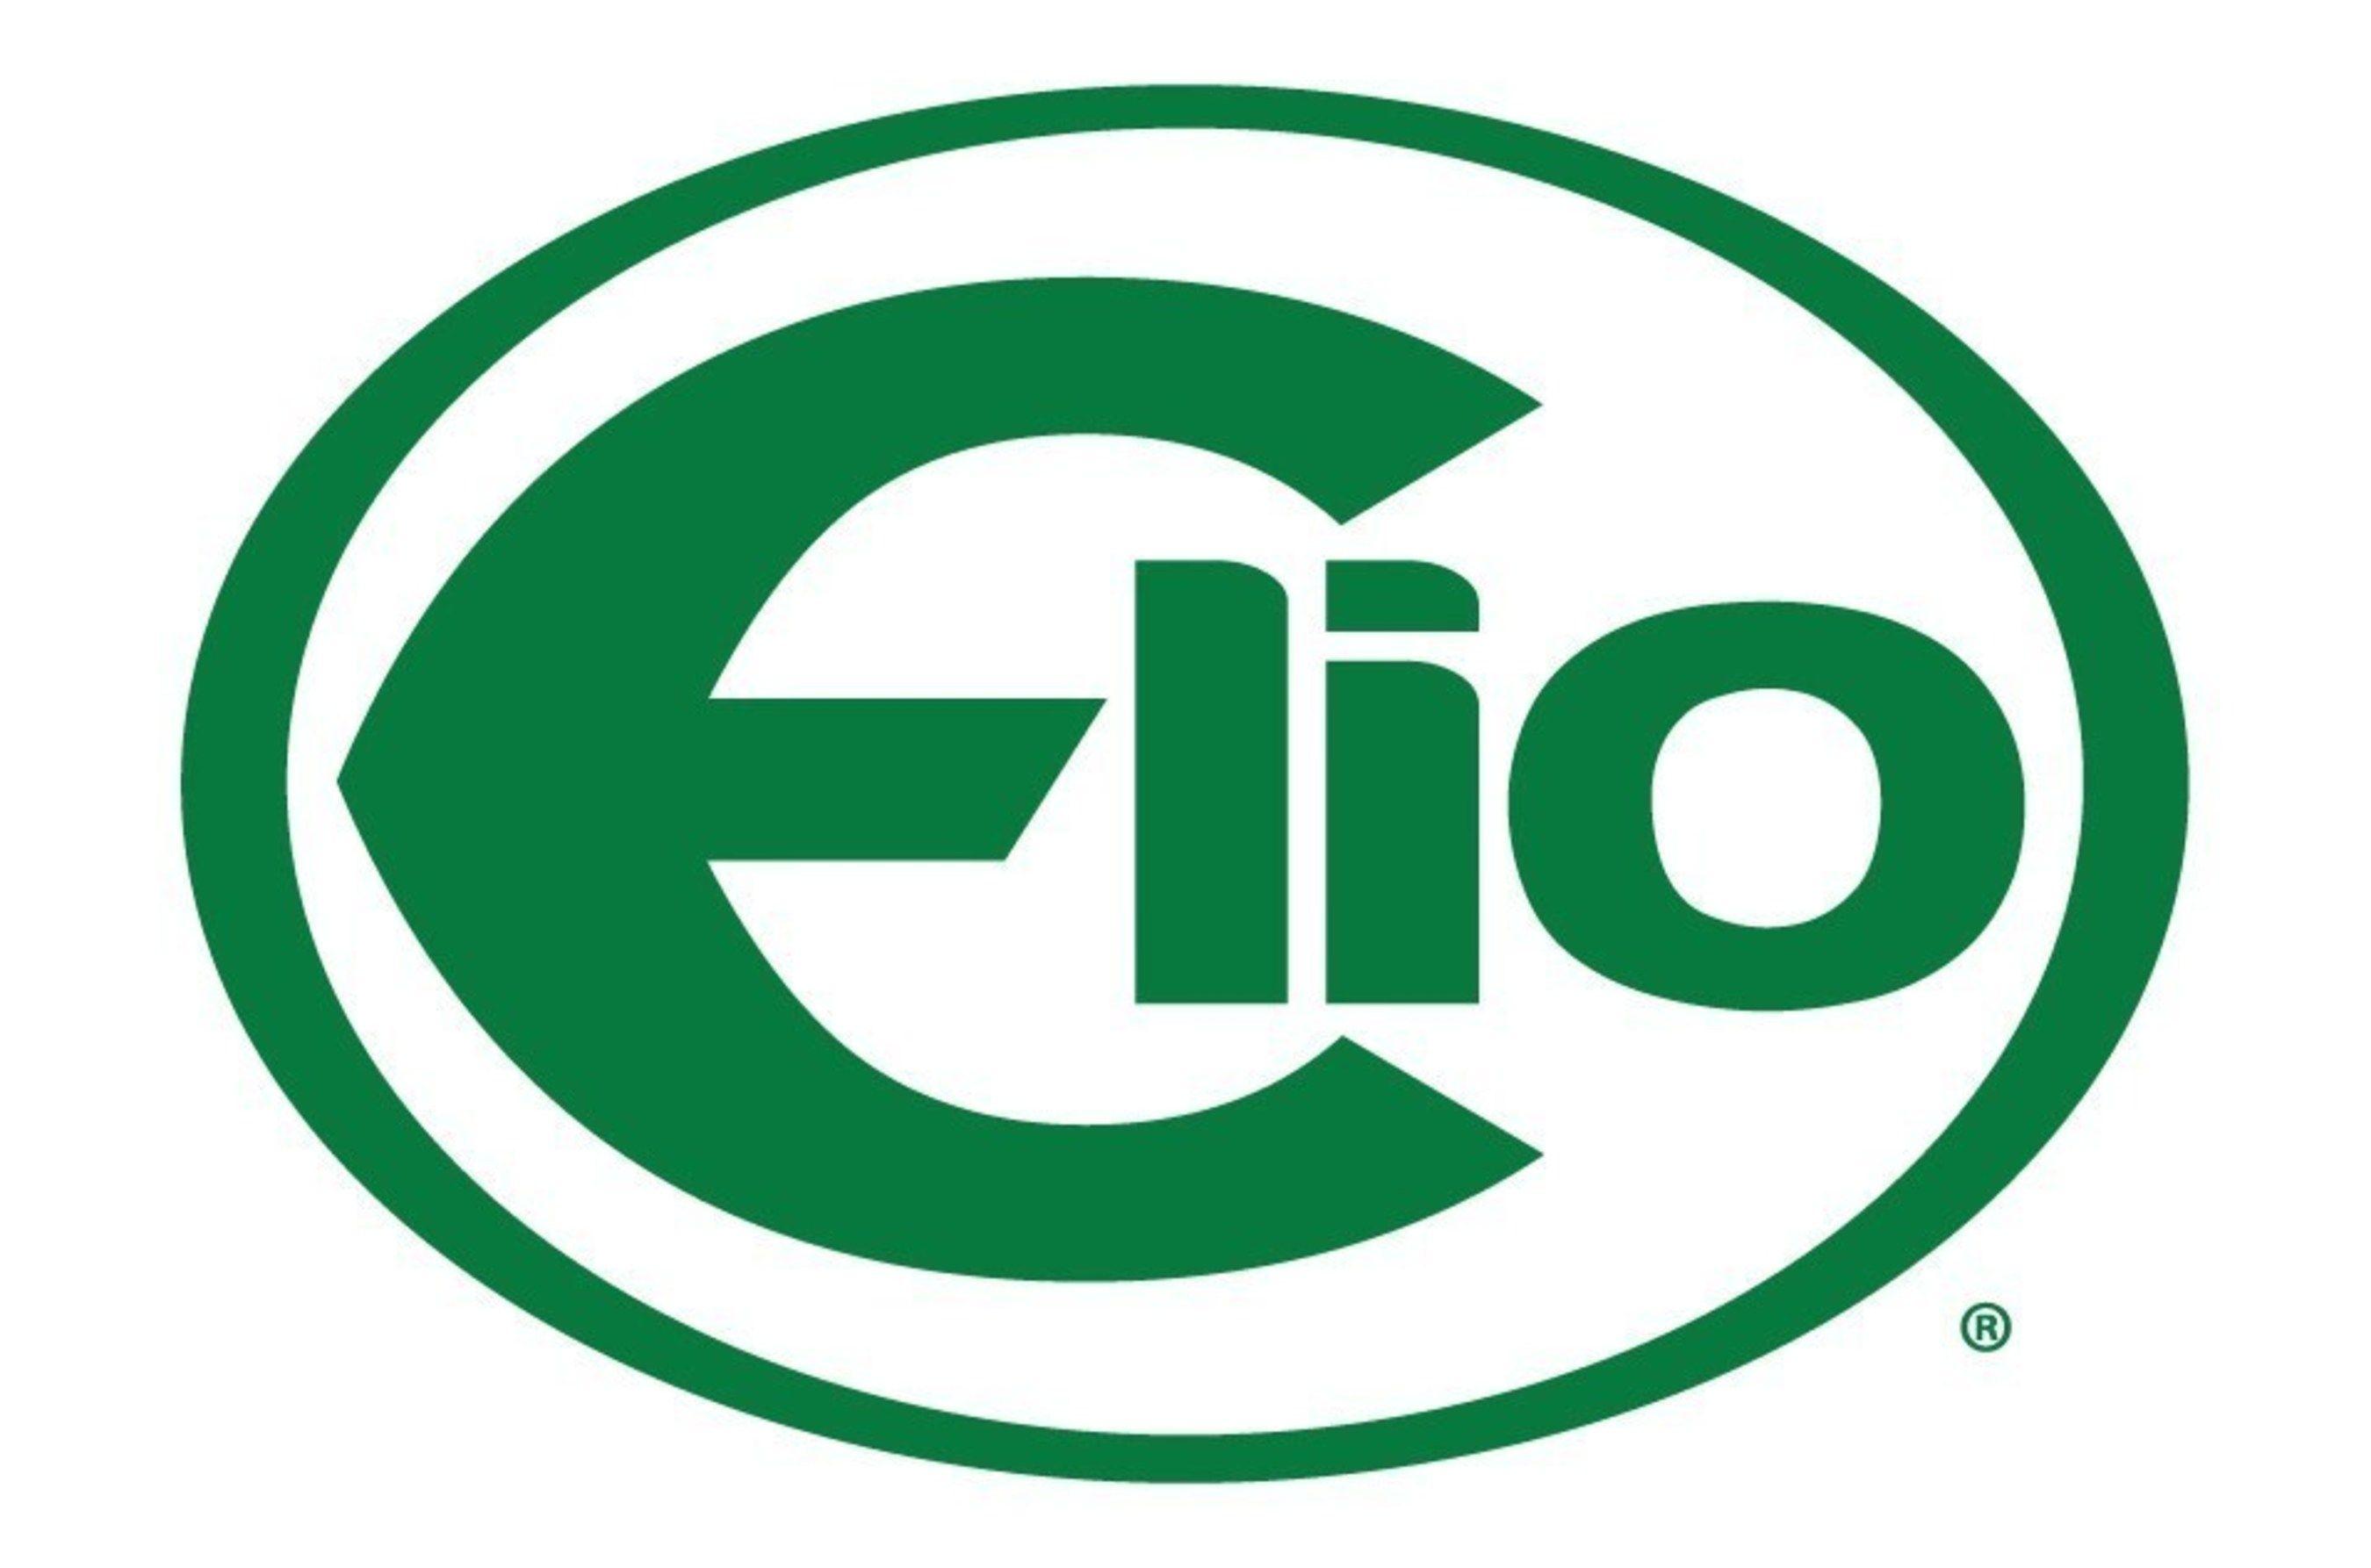 Rinamar Logo - Elio Motors, Linamar Sign Letter of Intent to Manufacture and Market ...